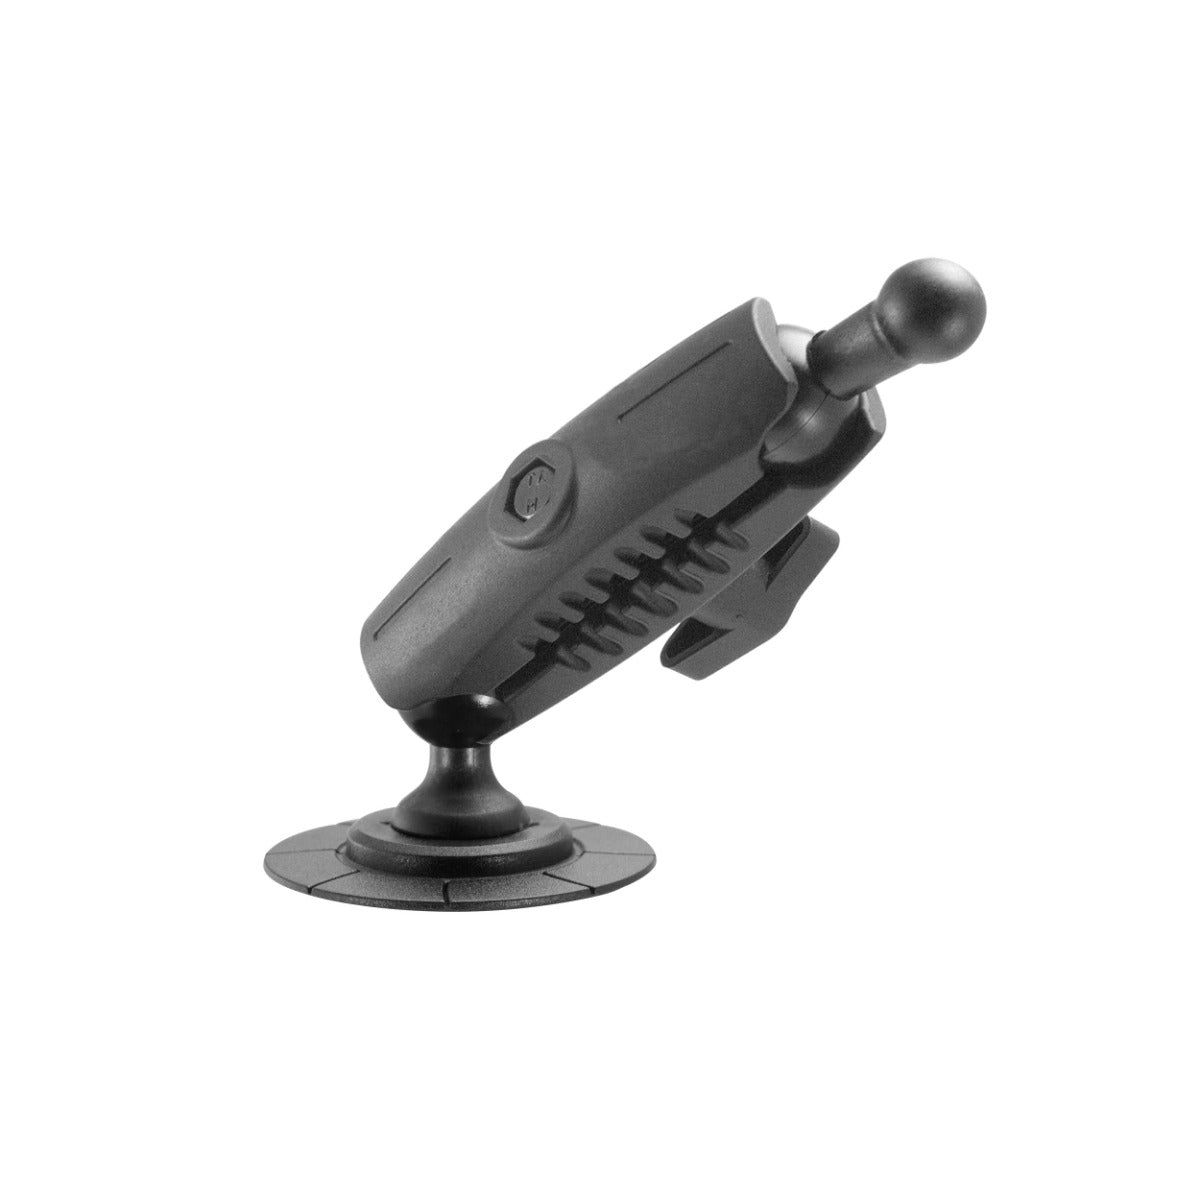 iBOLT 17mm Dual Ball to Strong VHB Adhesive Mount Base compatible w/ Garmin GPS and iBOLT Phone Holders